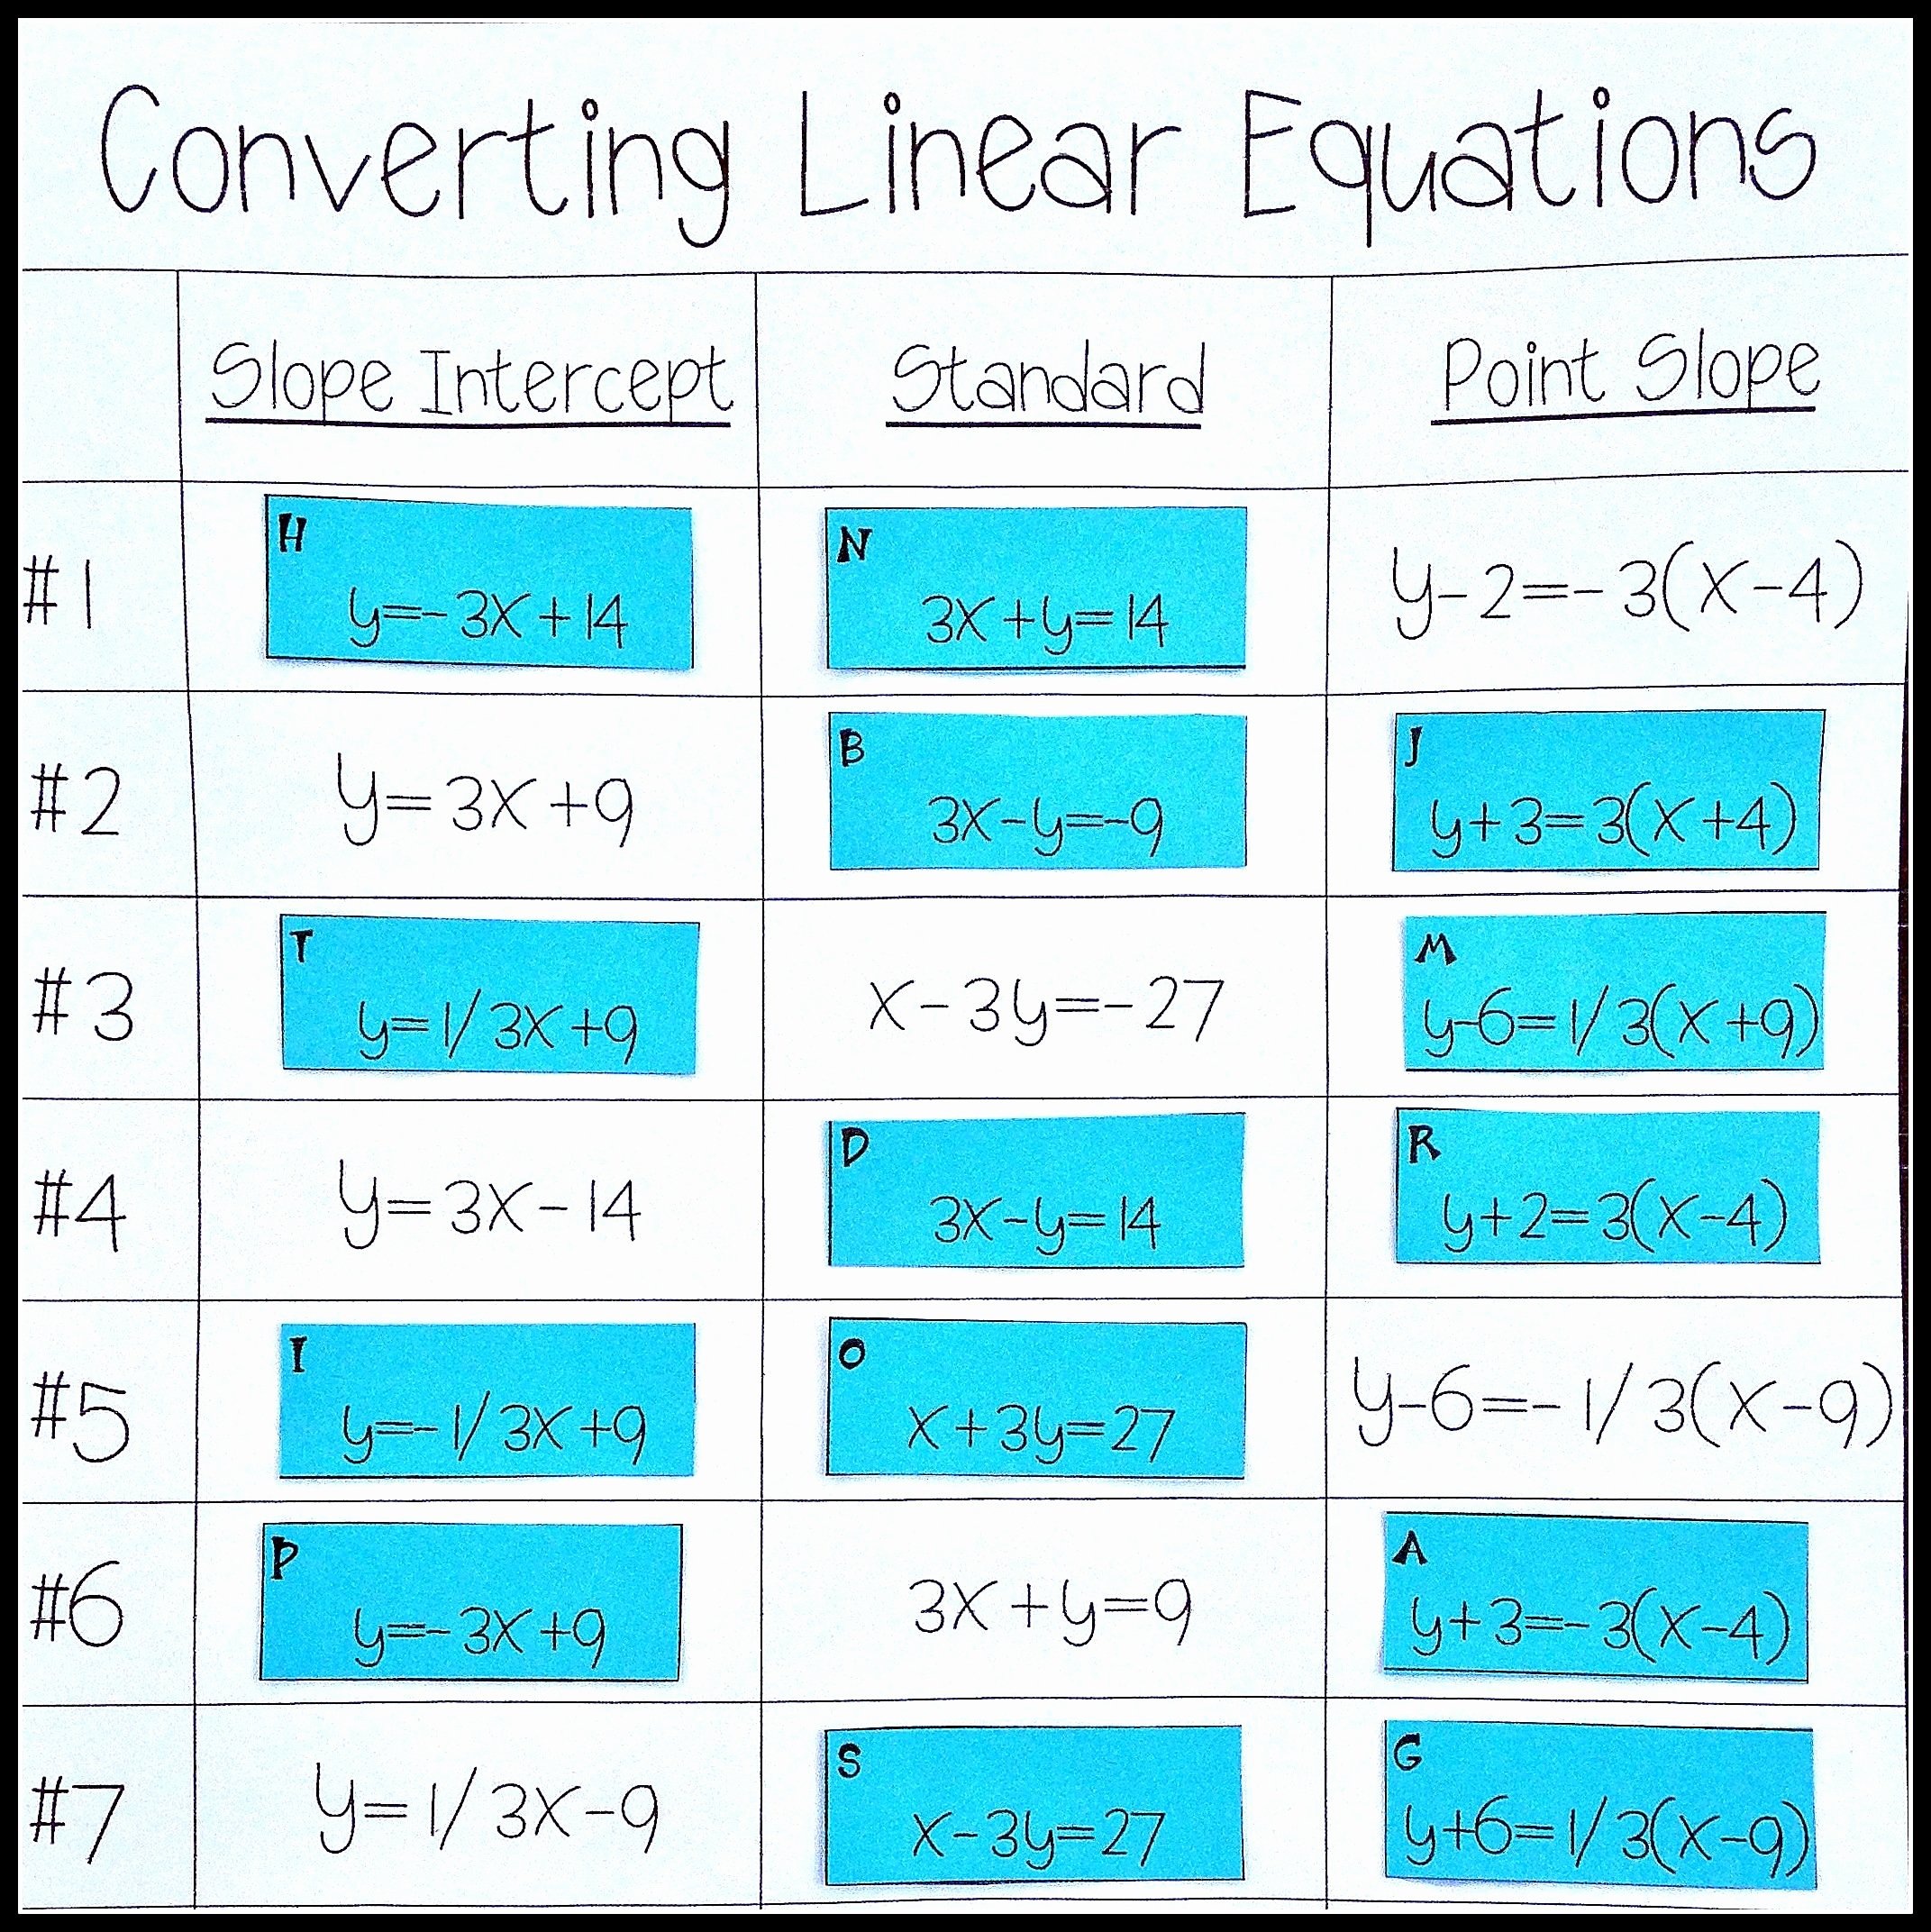 Linear Equation Worksheet with Answers Awesome Converting Linear Equations Slope Intercept Standard